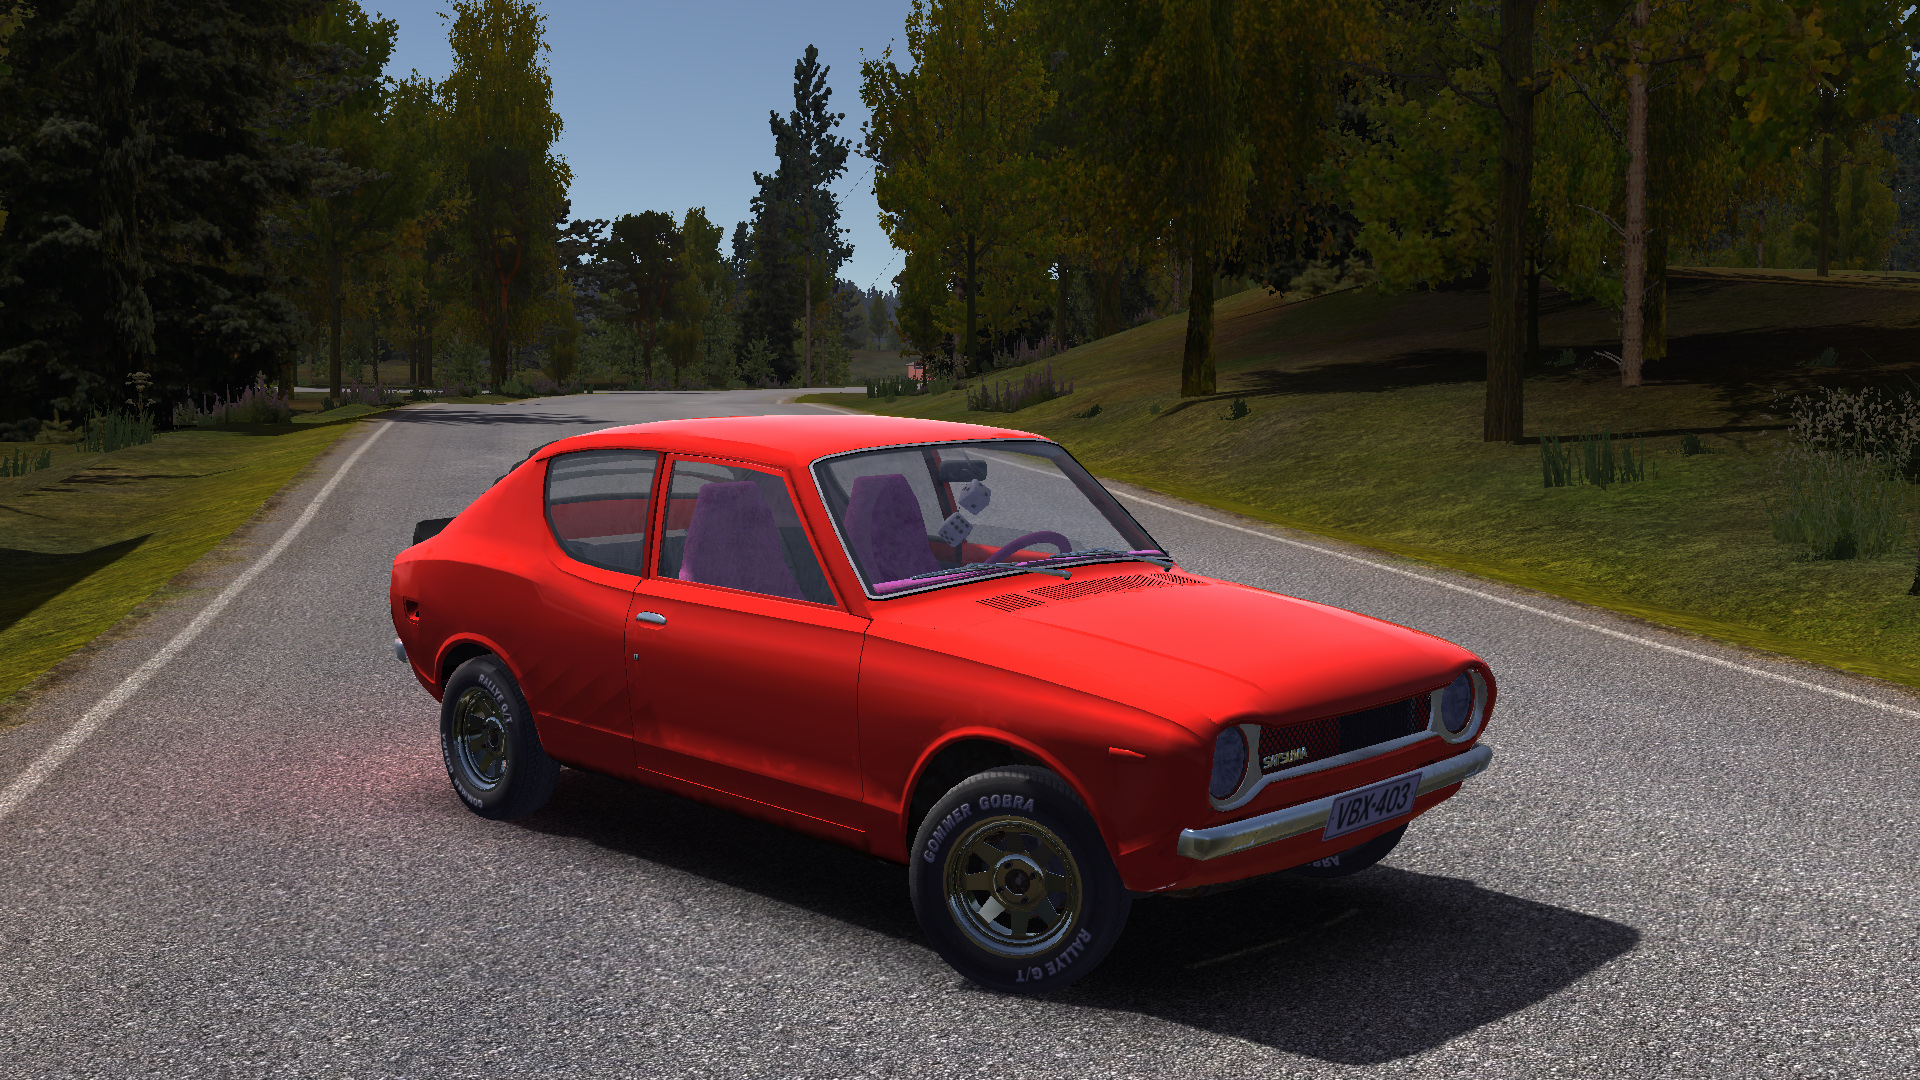 My Summer Car  Big Update As Game Nears Development Conclusion